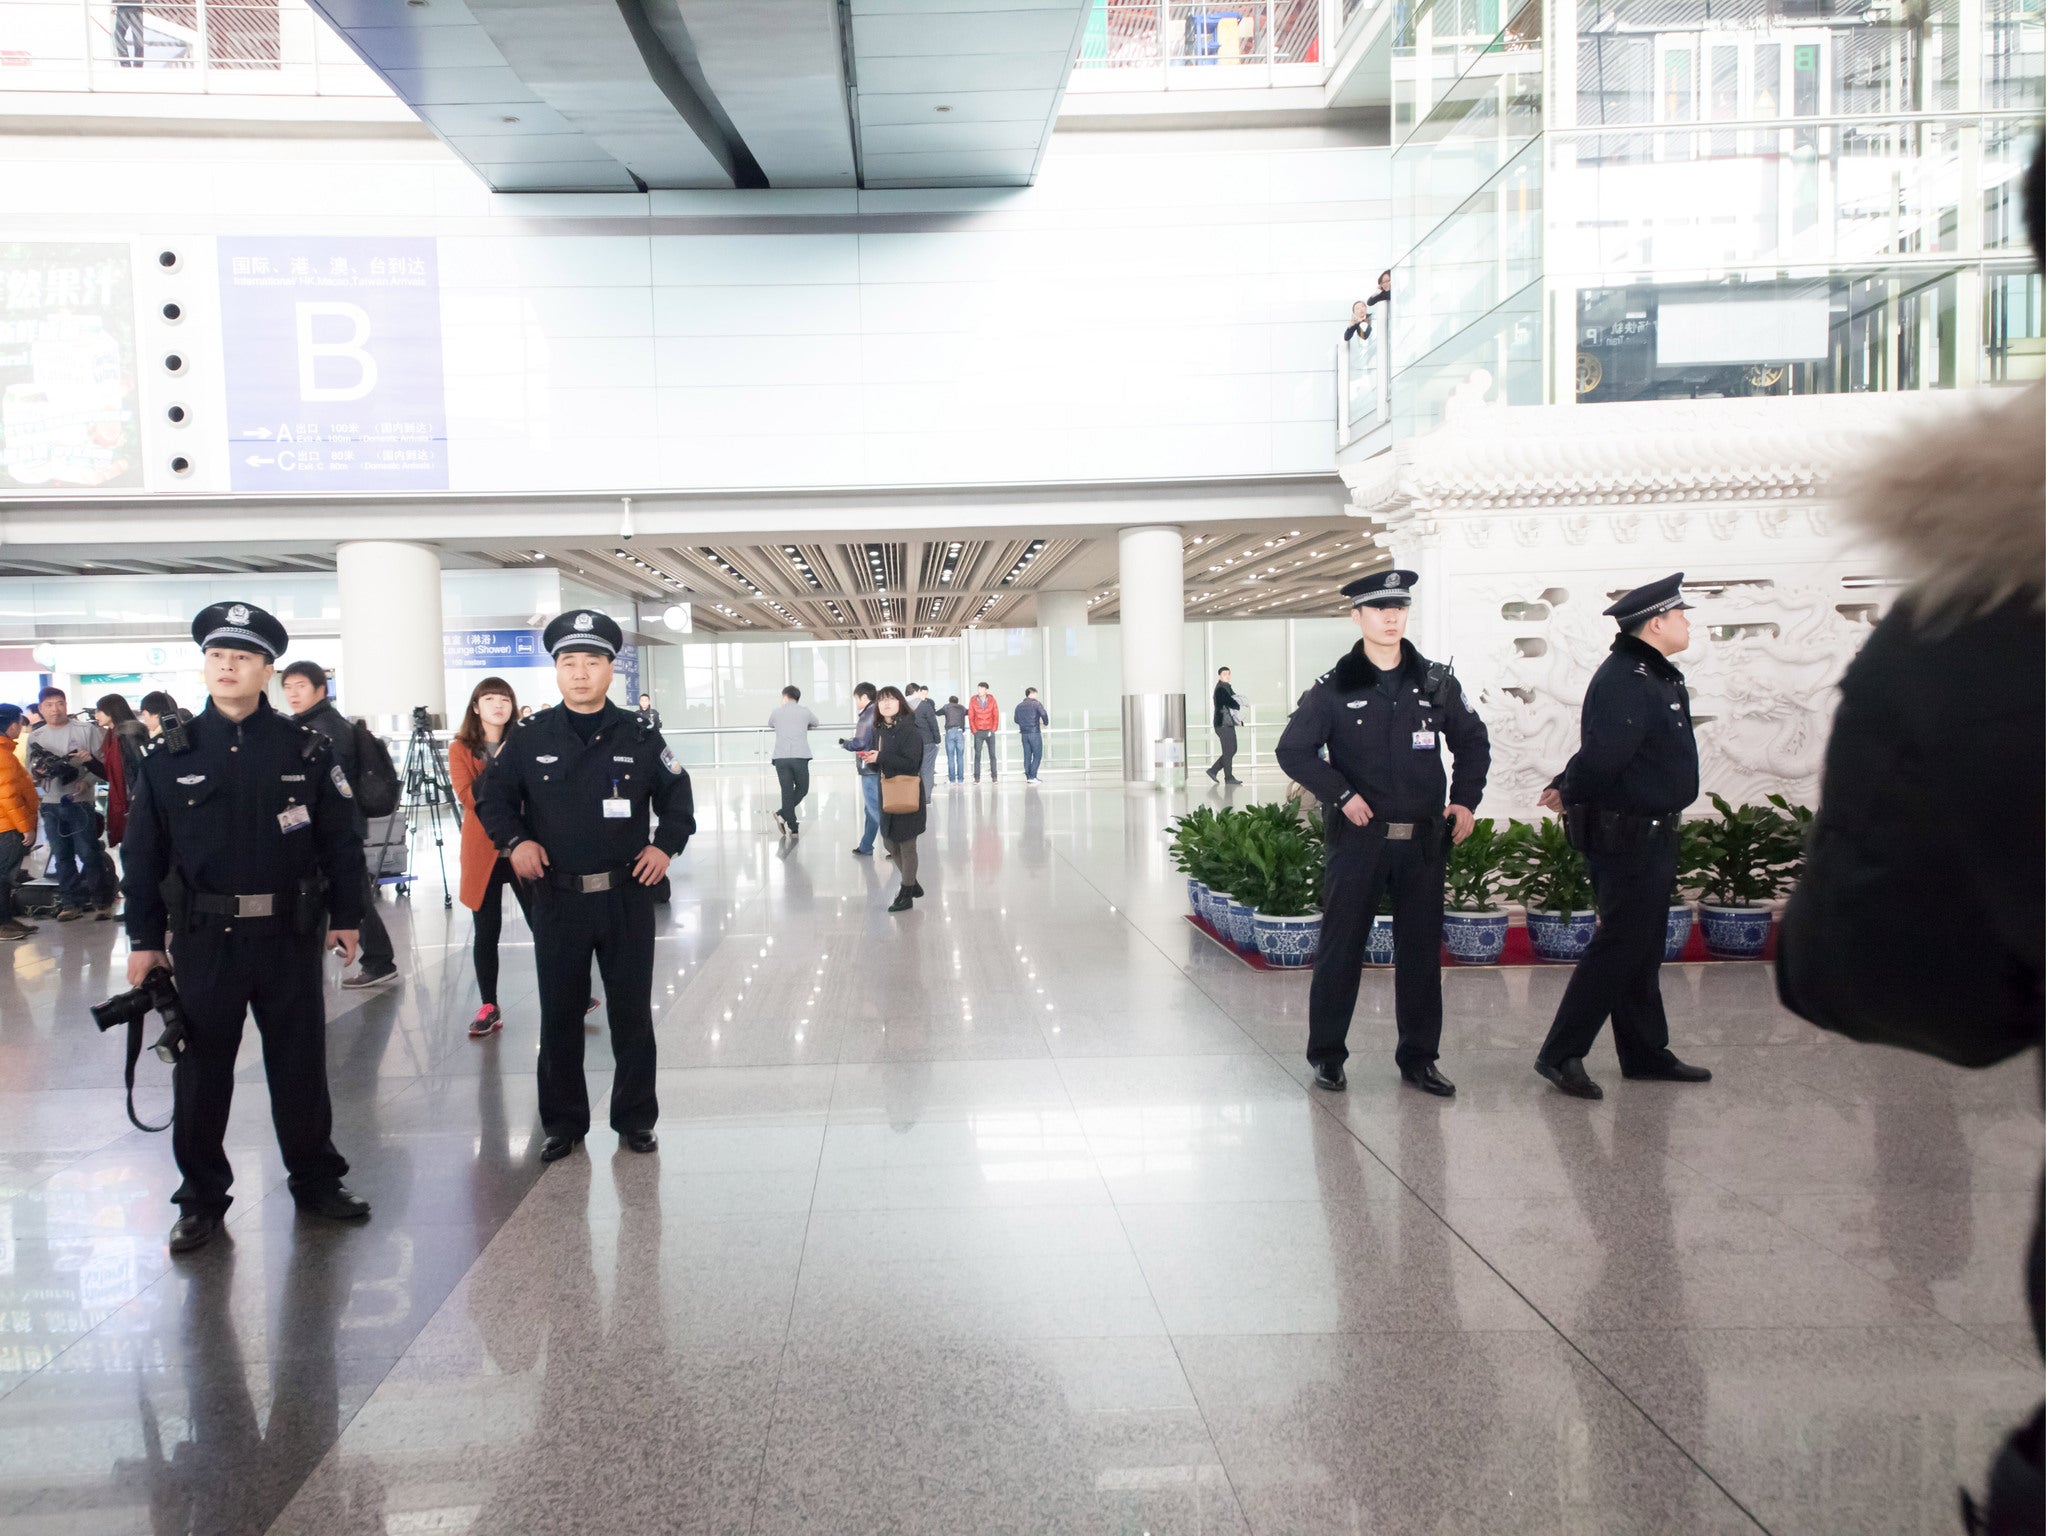 Chinese authorities arrested the tourists at Ordos Airport